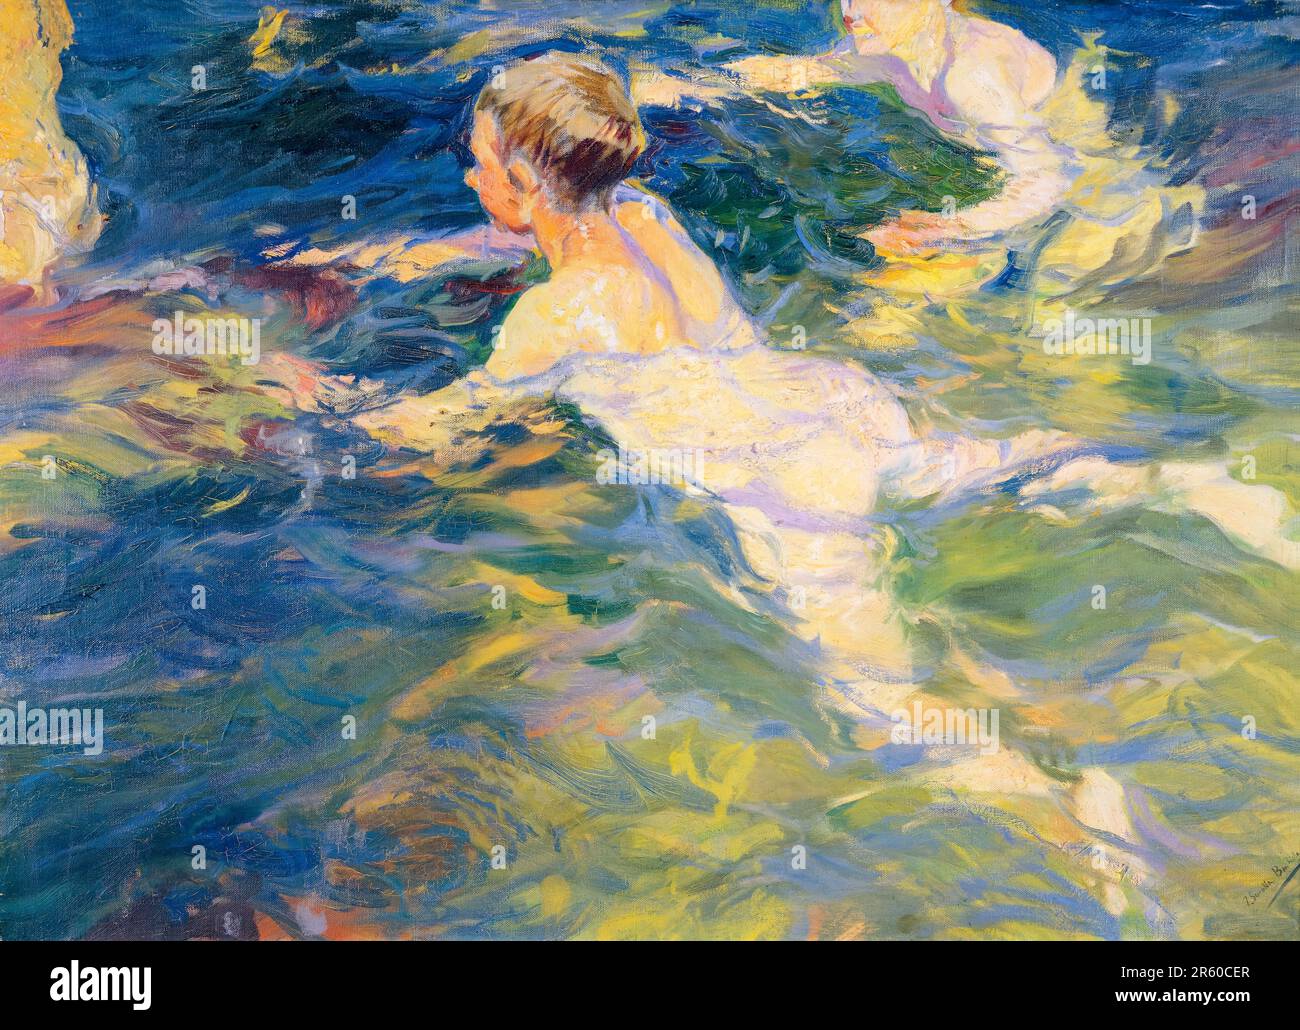 Joaquín Sorolla, Swimmers, Jávea, painting in oil on canvas, 1905 Stock Photo